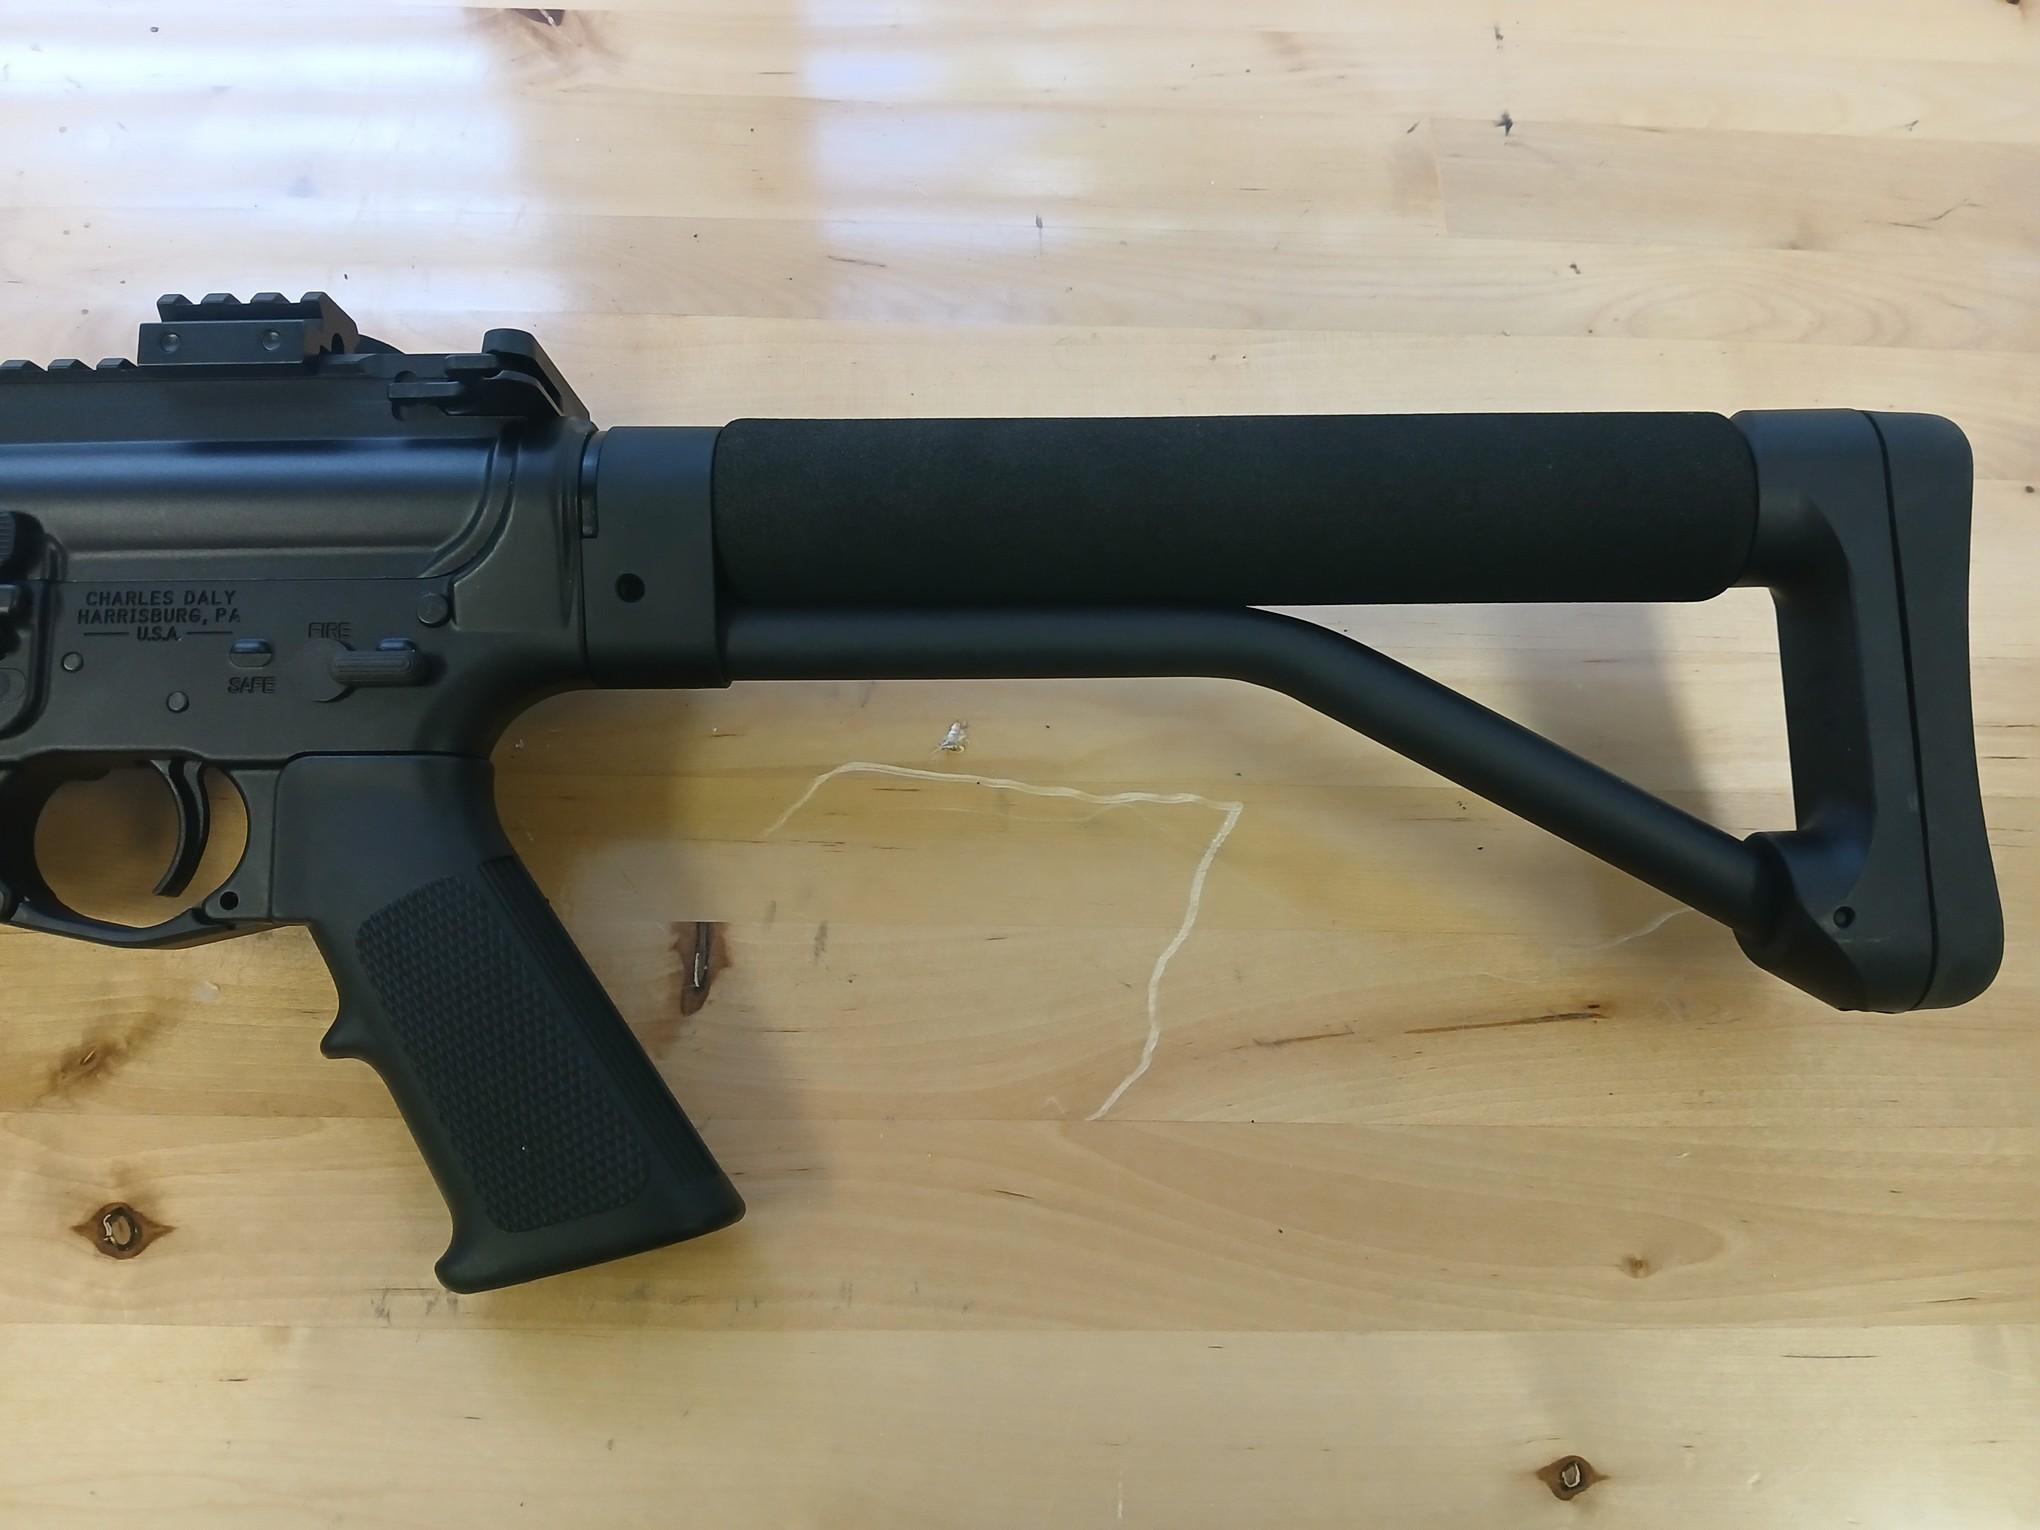 Charles Daily DERFENSE AR-15 W/ Stainless Steel Barrel & Pistol Grip Model # CDD-15 Comes Complete w